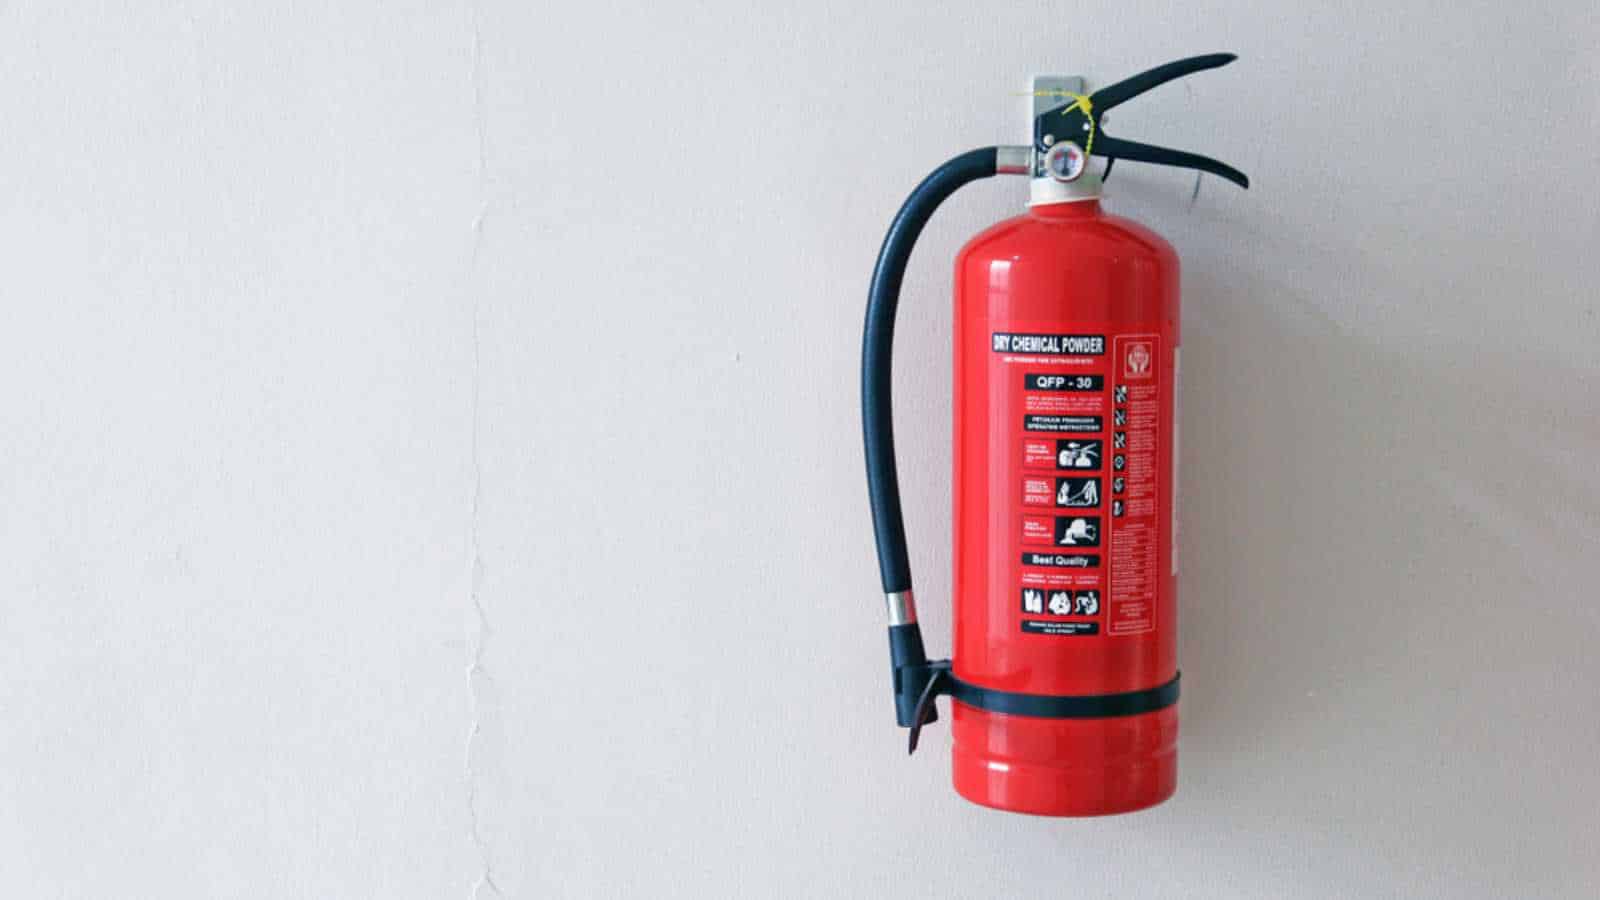 a fire extinguisher on the wall